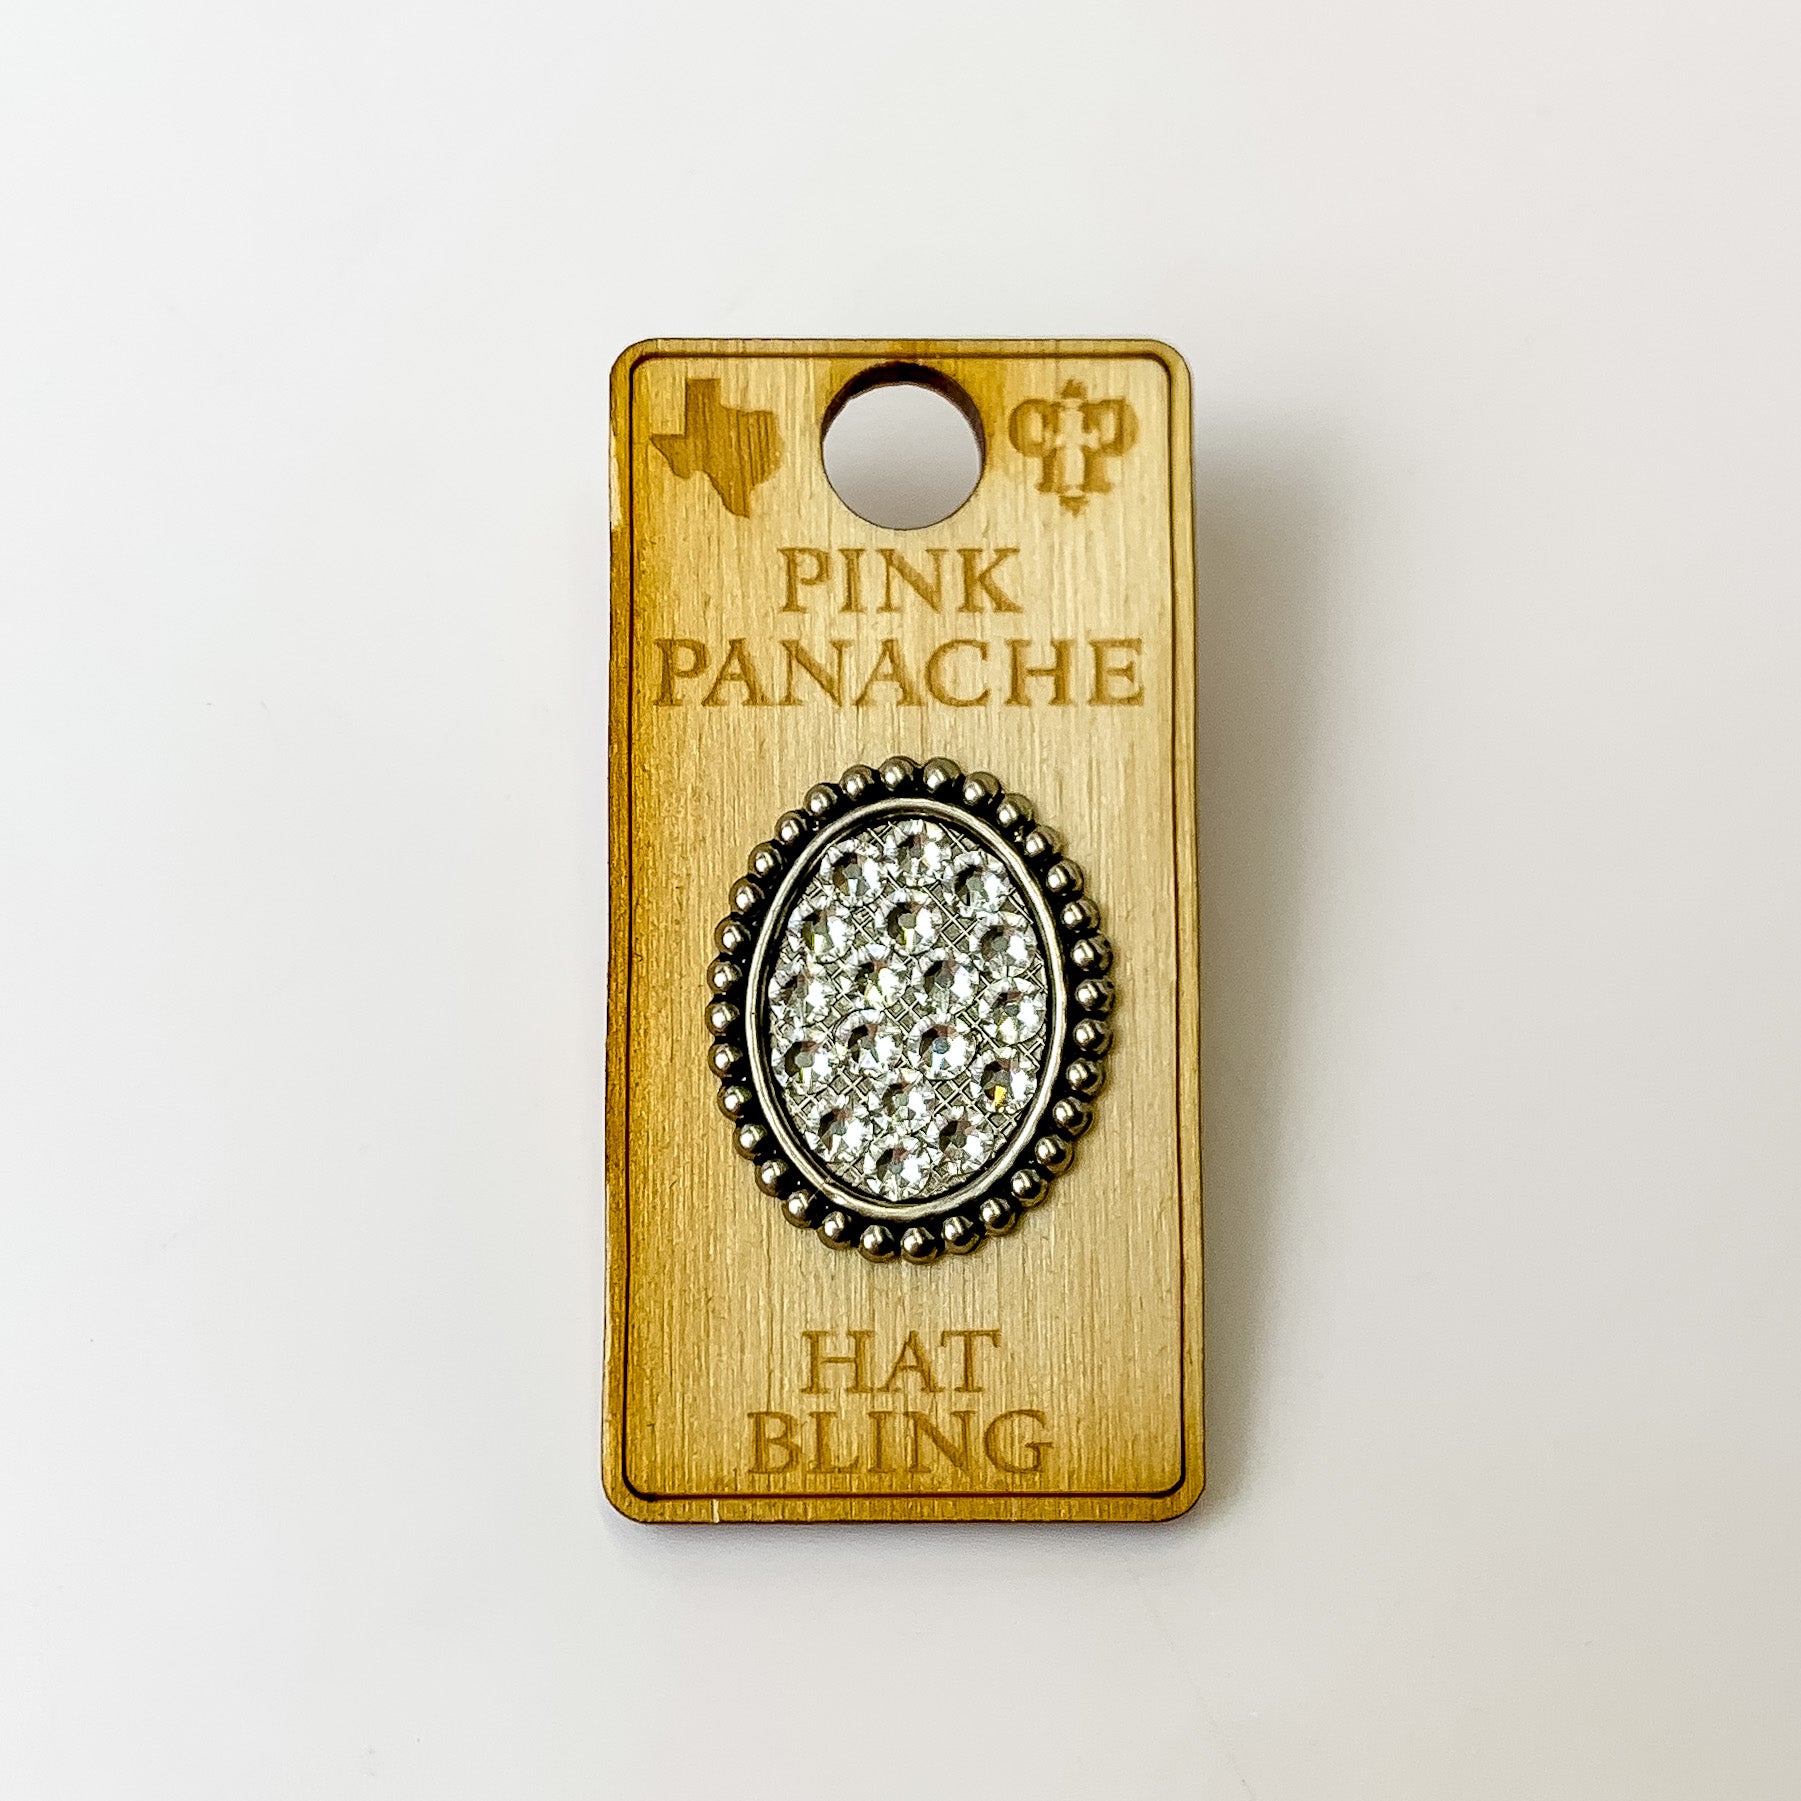 Silver, oval hat pin with a clear crystal inlay. This hat pin is pictured on a wooden Pink Panache holder on a white background.